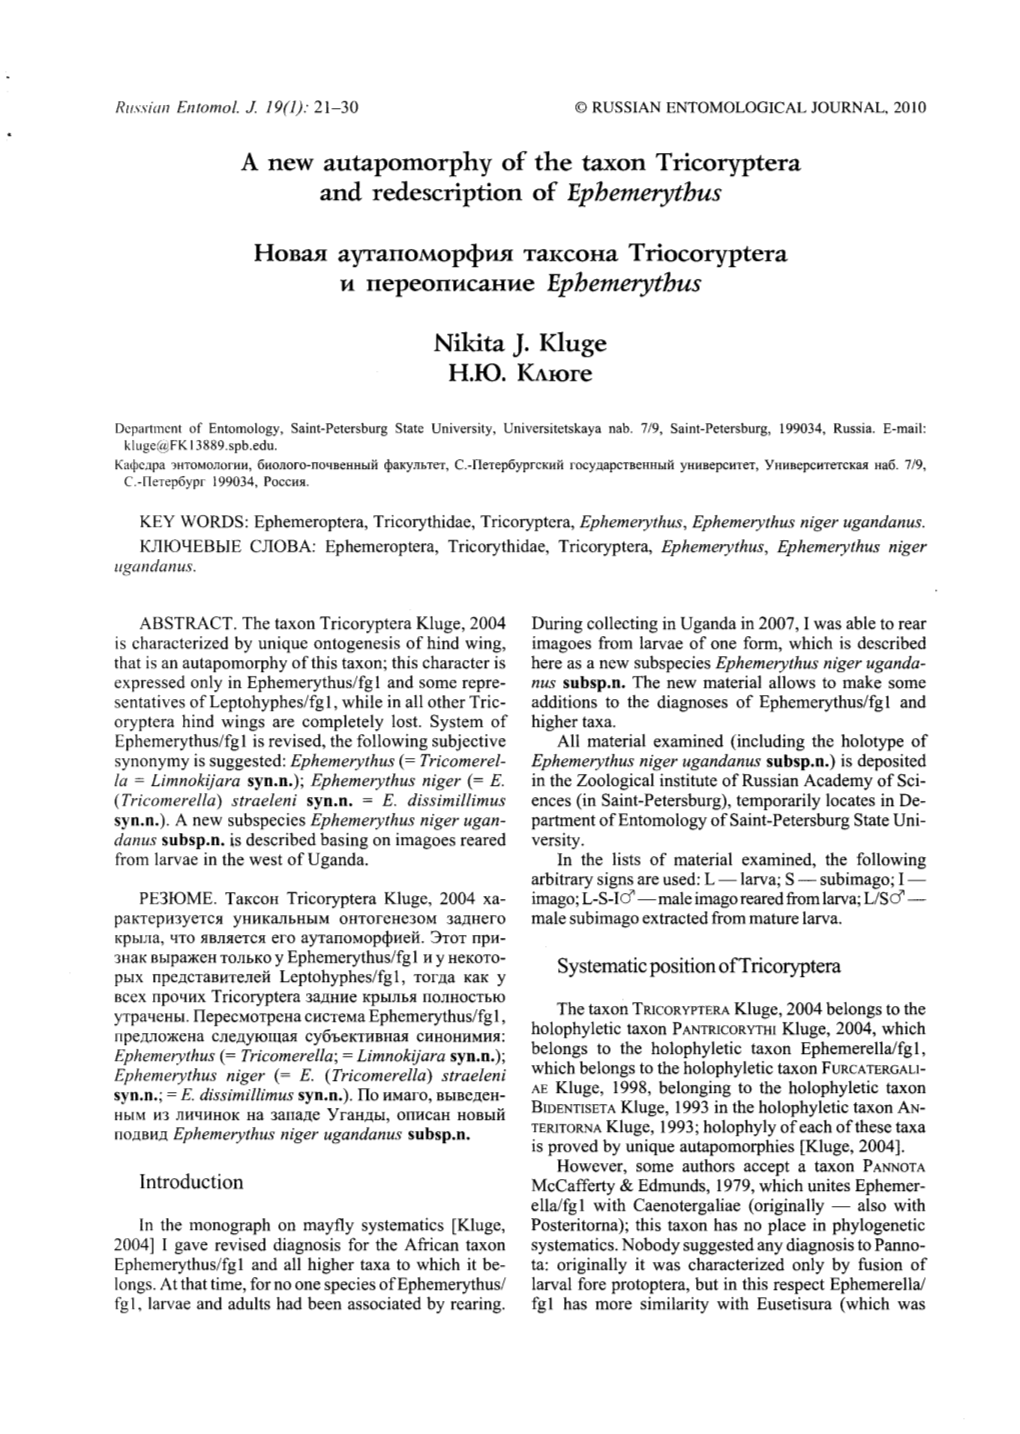 A New Autapomorphy of the Taxon Tricoryptera and Redescription of Ephemerythus